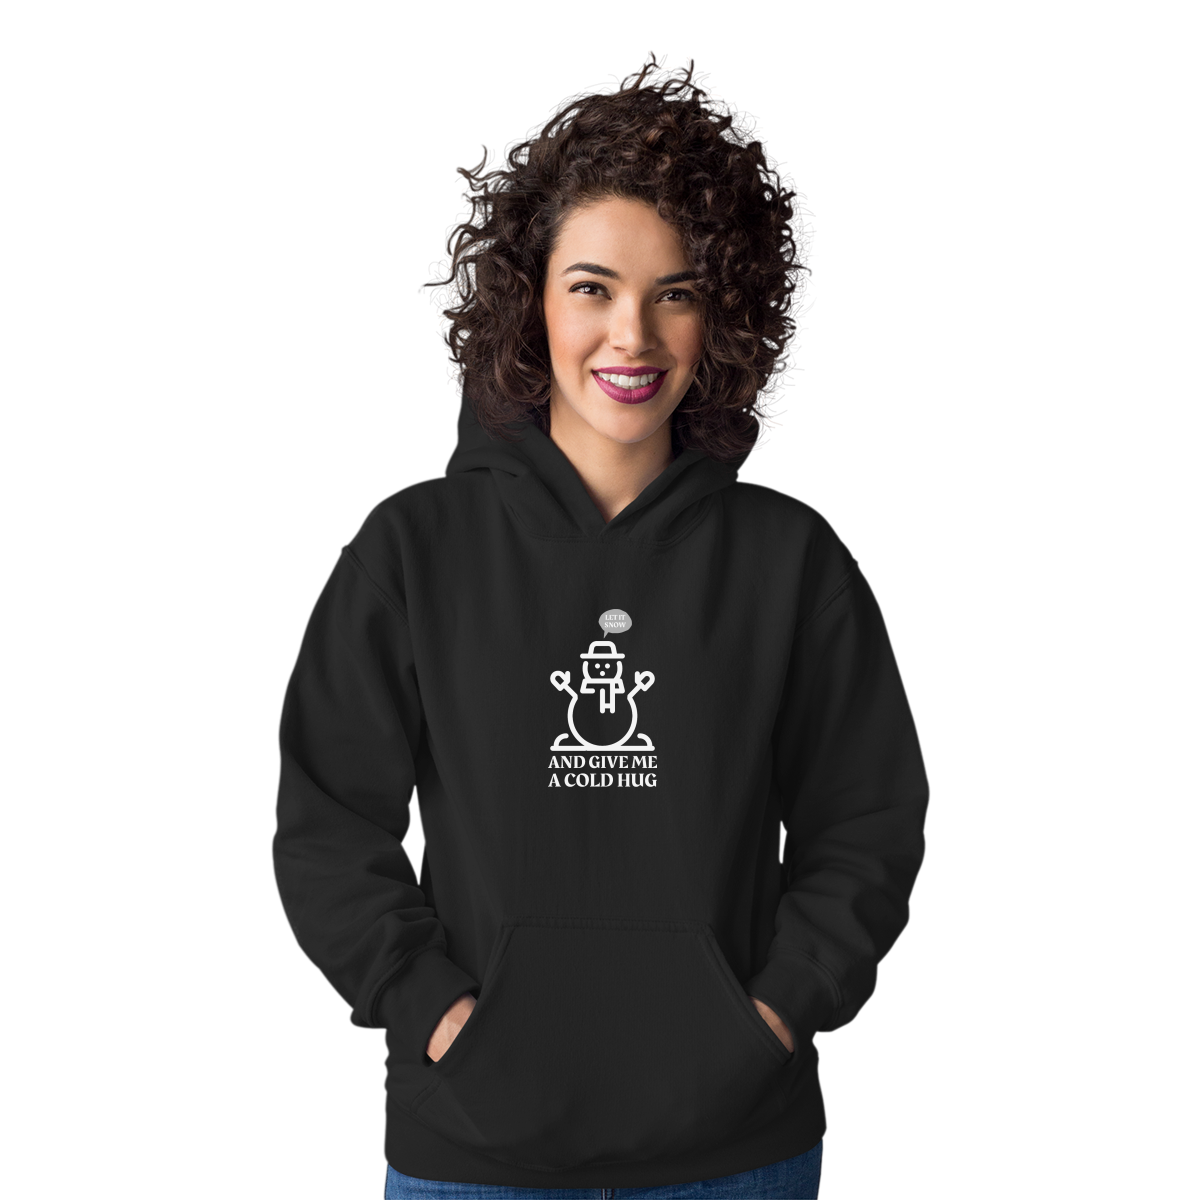 Let It Snow and Give Me a Cold Hug Unisex Hoodie | Black